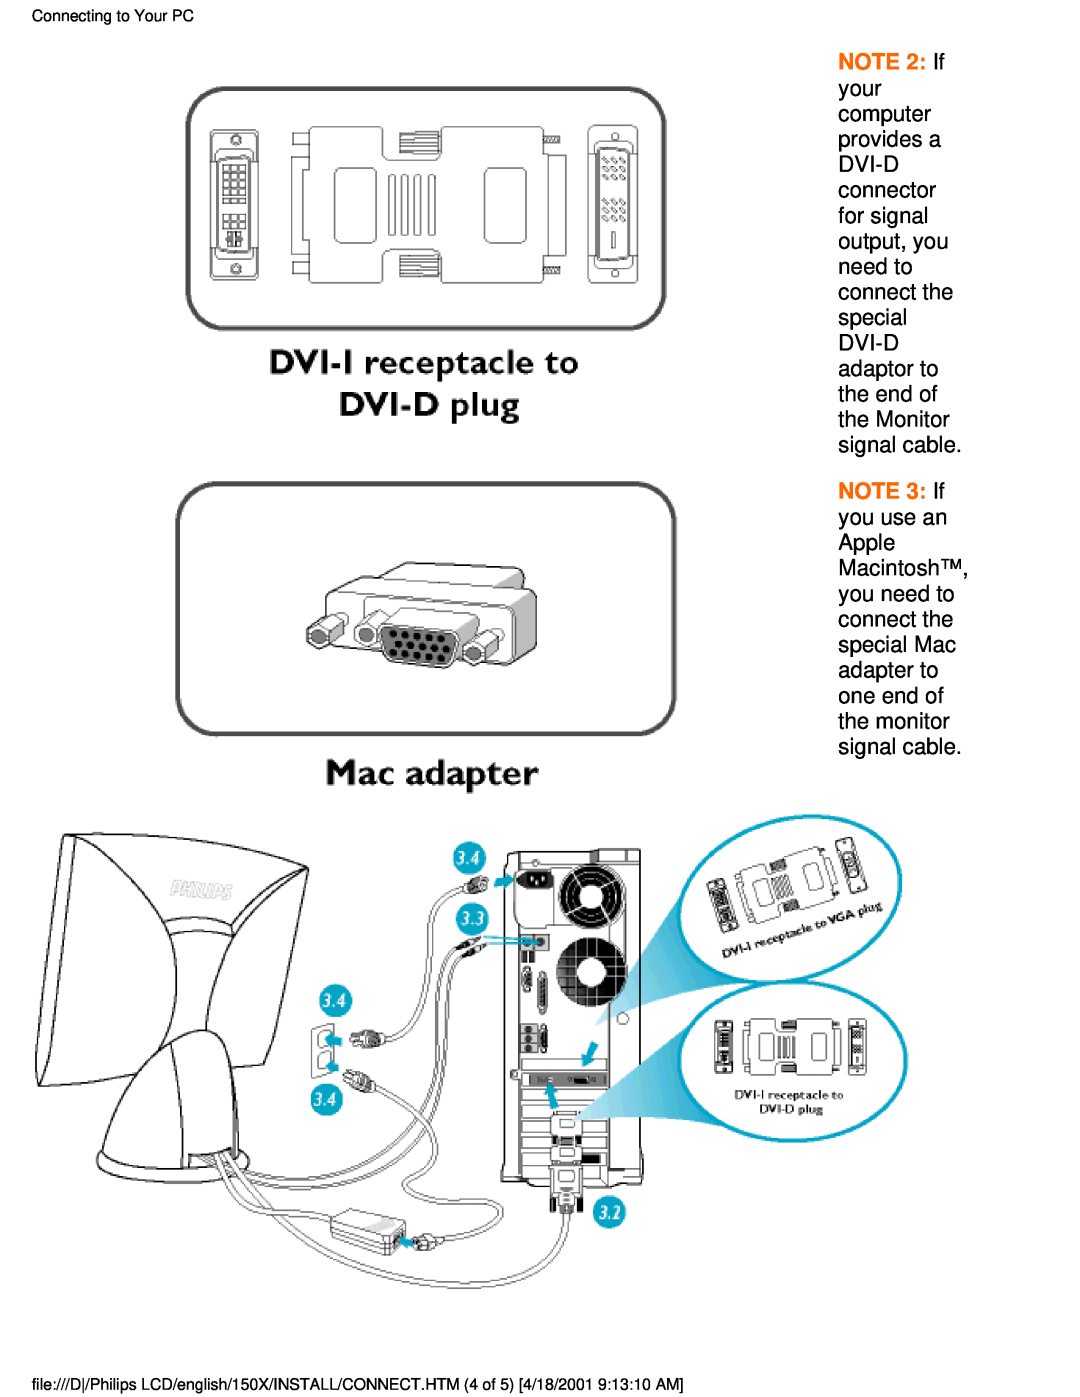 Philips 150X user manual NOTE 2 If, Connecting to Your PC 